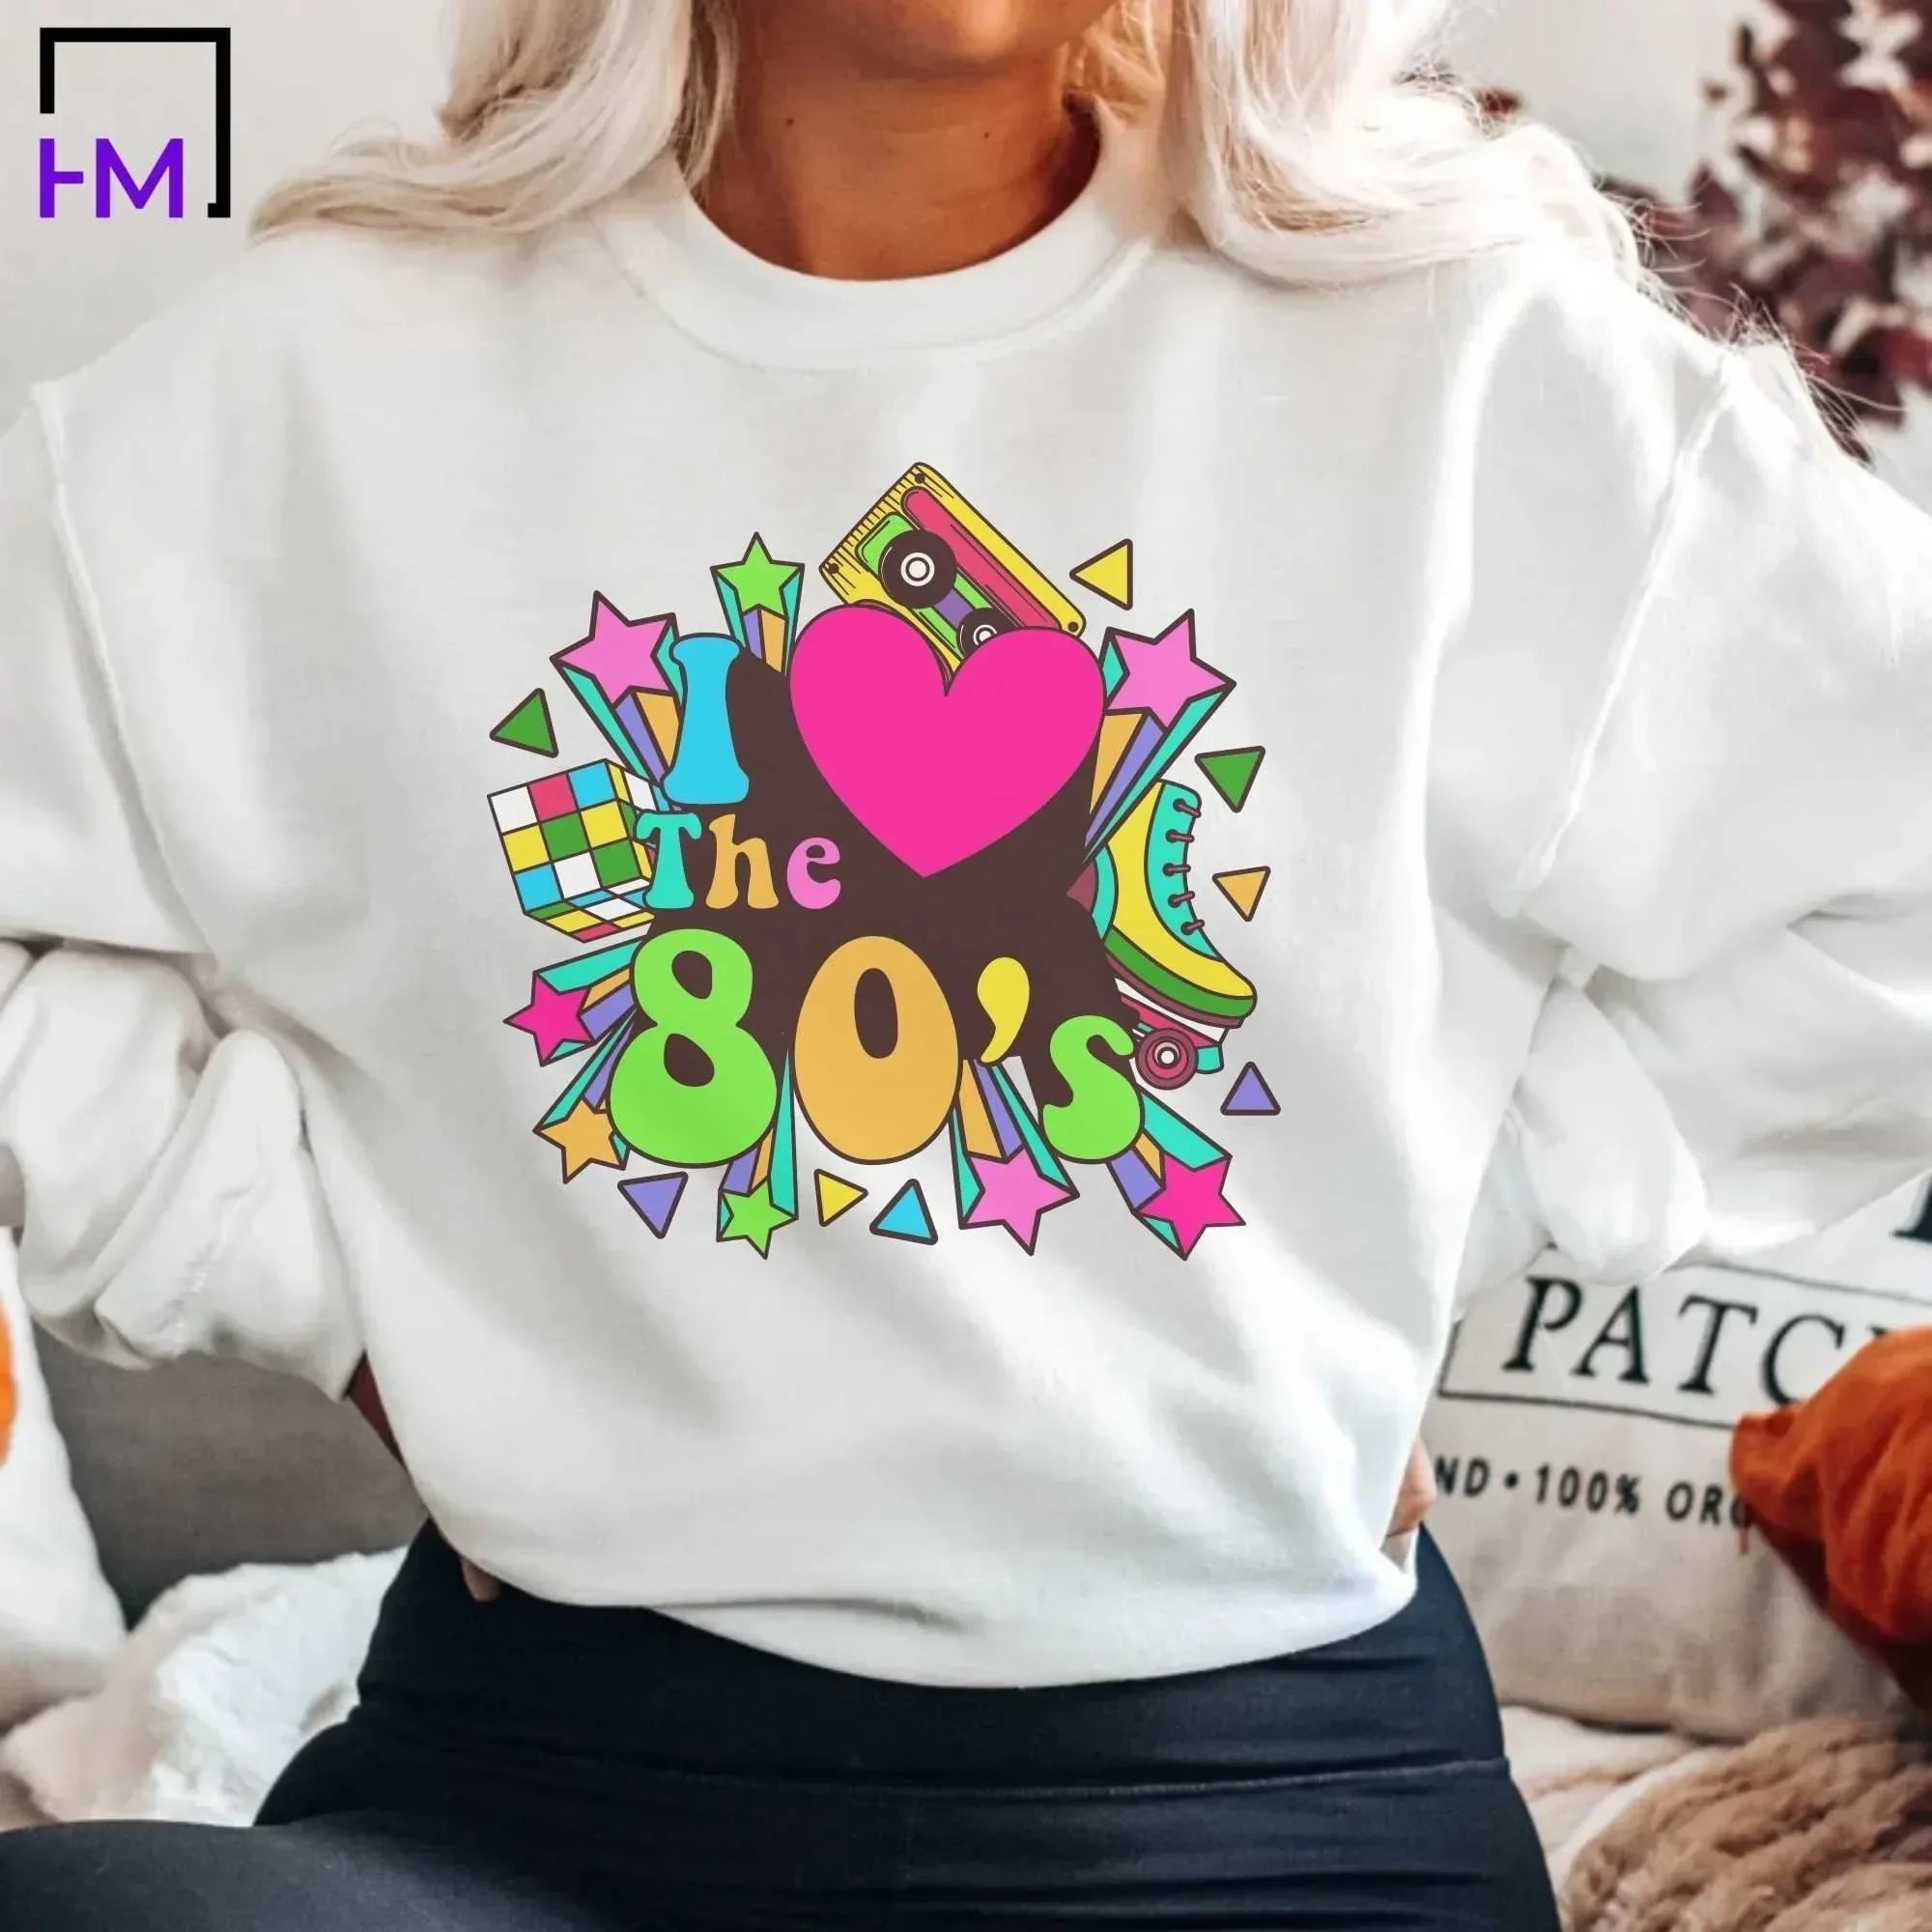 This 80s Themes Shirt Perfect for Any Party! Get this I Love the 80s Shirt Today! – HMDesignStudioUS